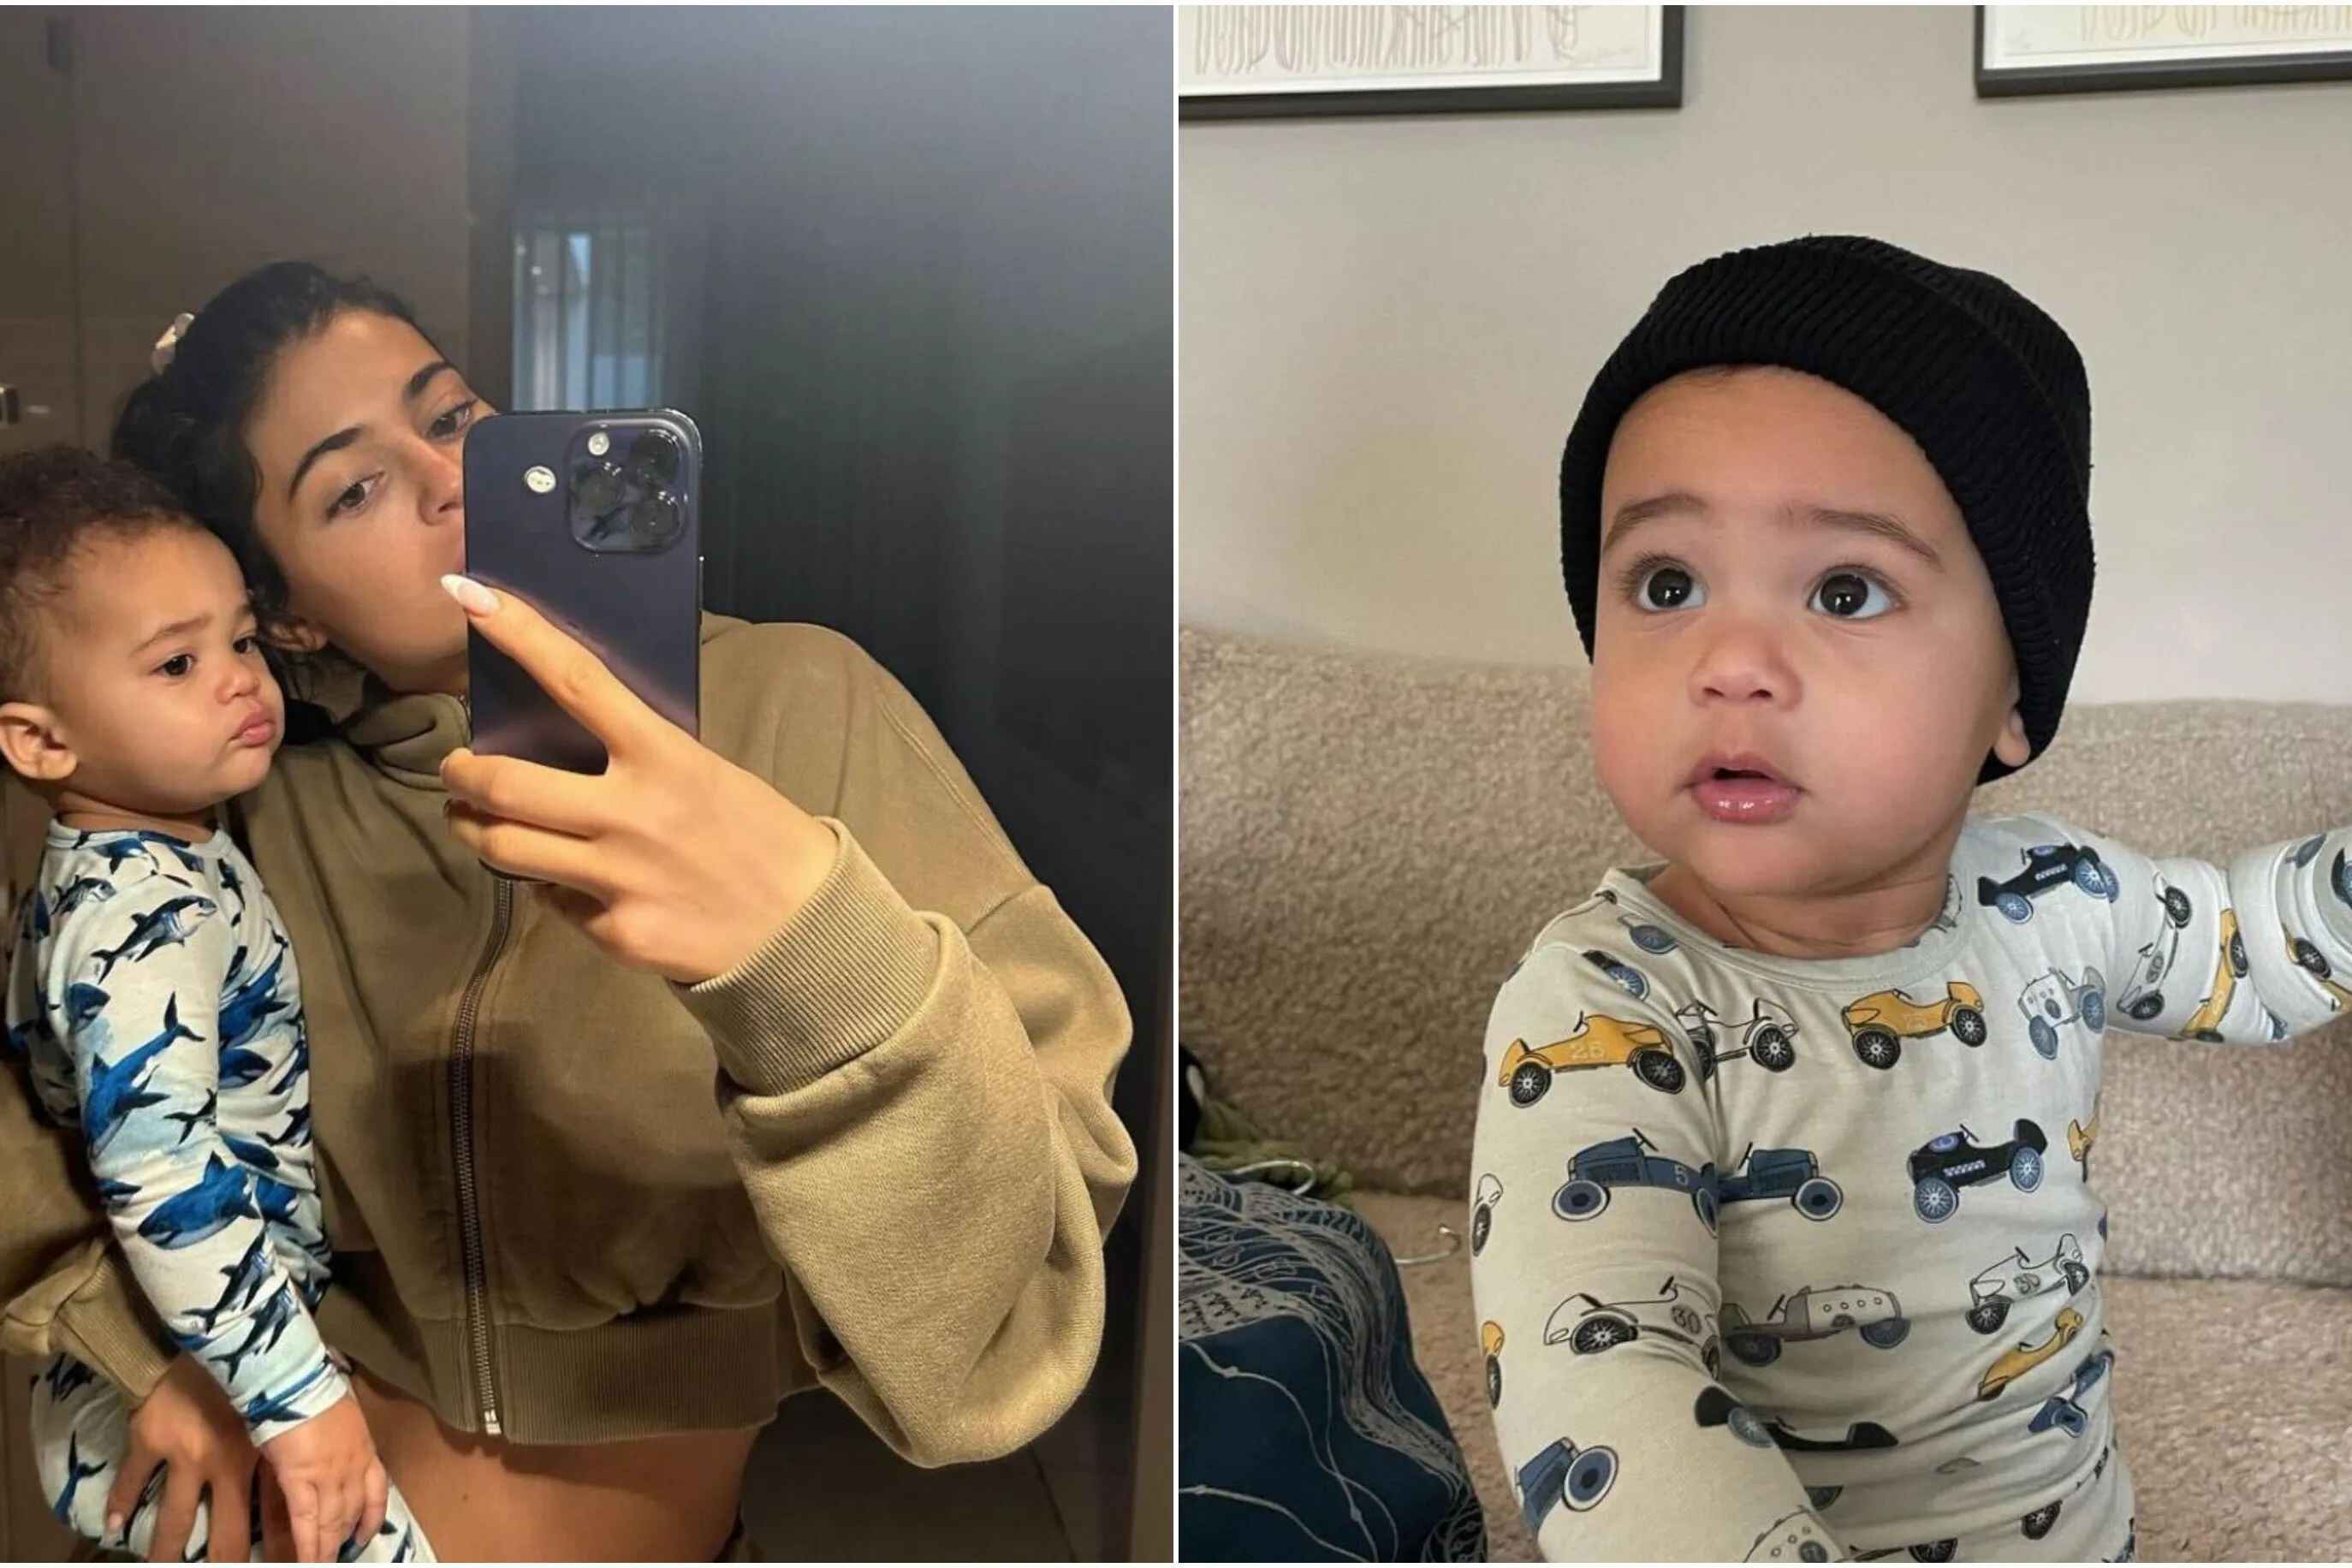 New Name For Kylie Jenner And Travis Scott’s Son: Aire